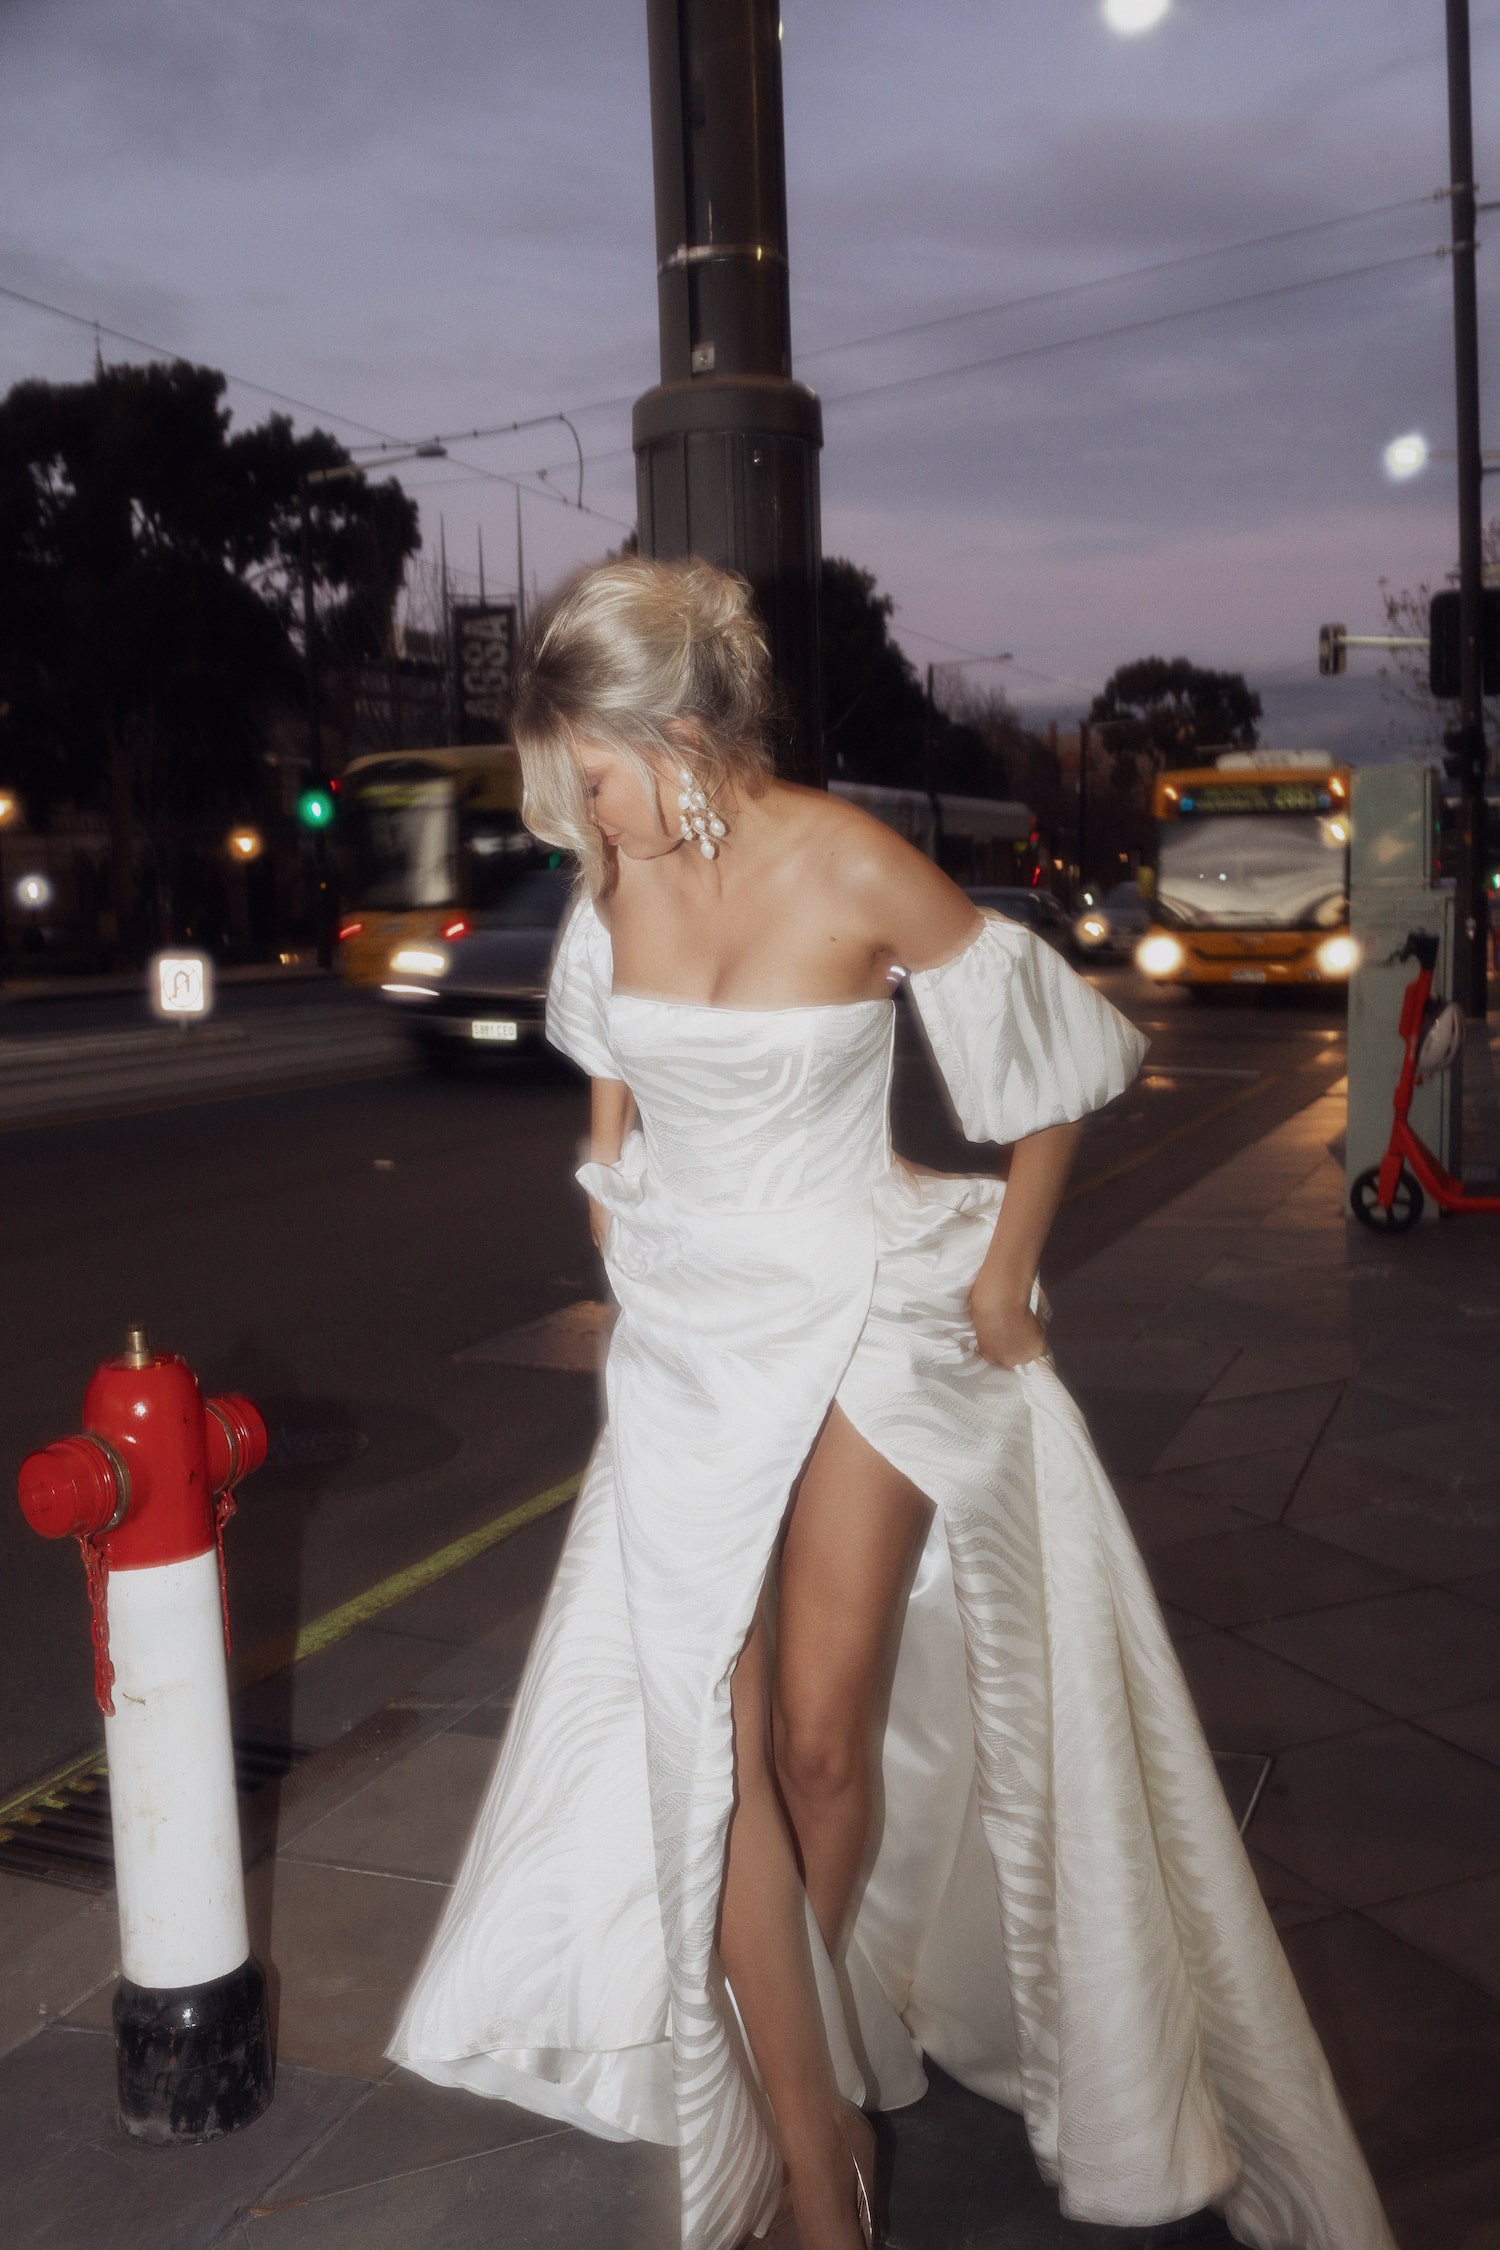 Model on sidewalk next to a fire hydrant at night, hitching skirt of the Concerto gown up to show off the high leg split.